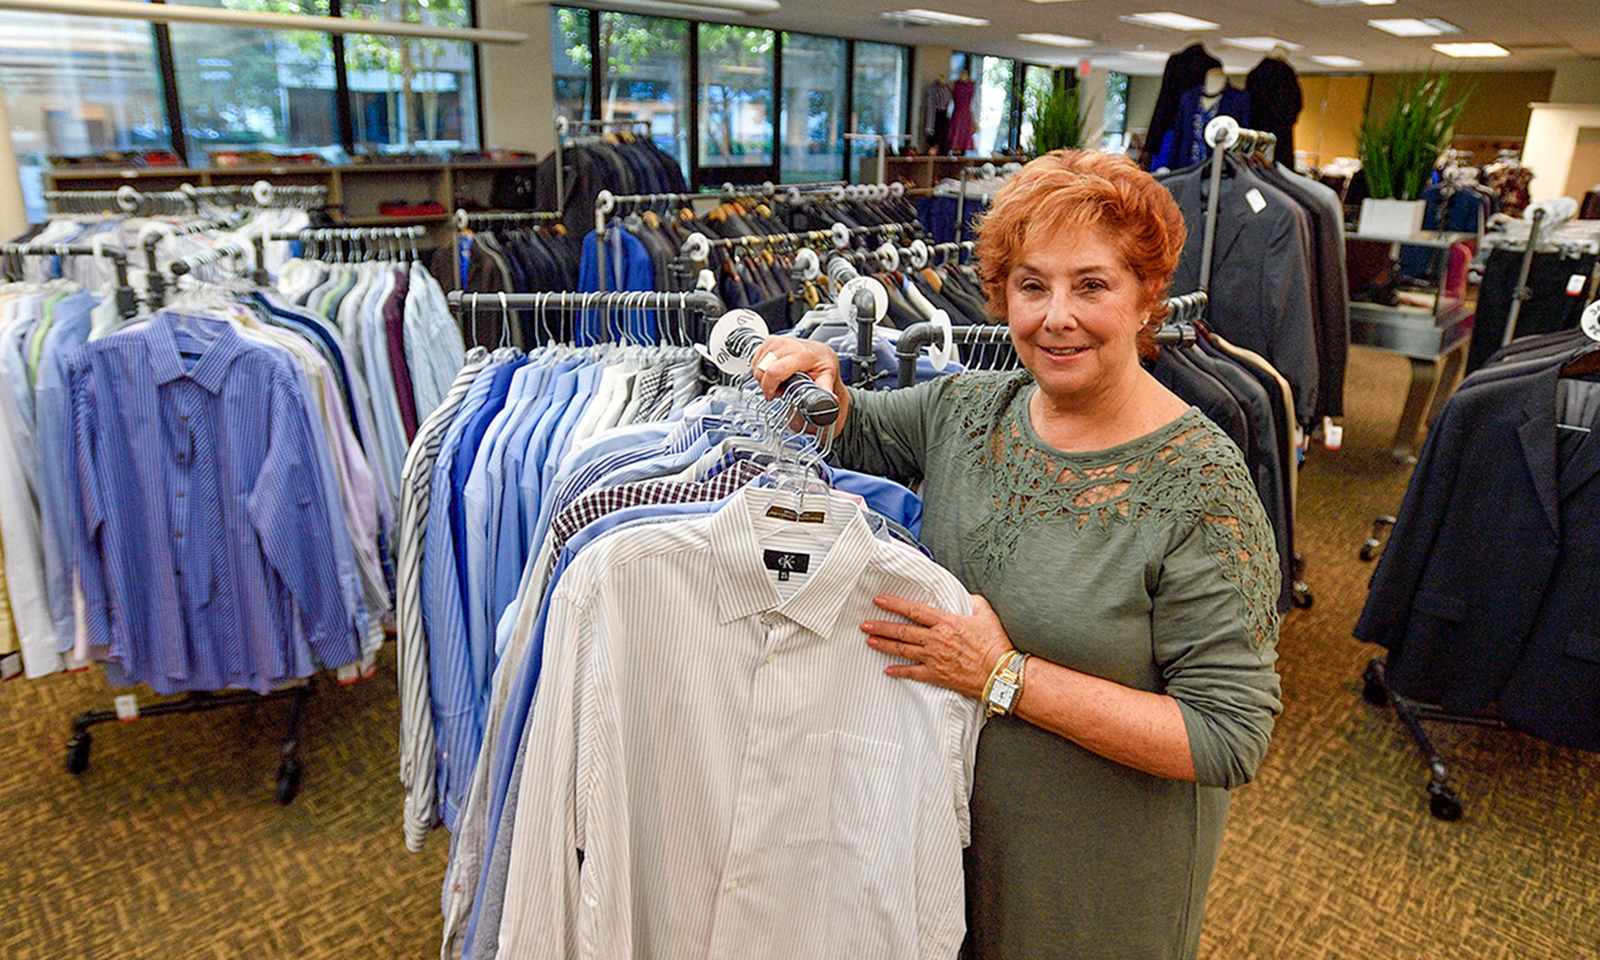 Providing job seekers with work clothes to rebuild their careers